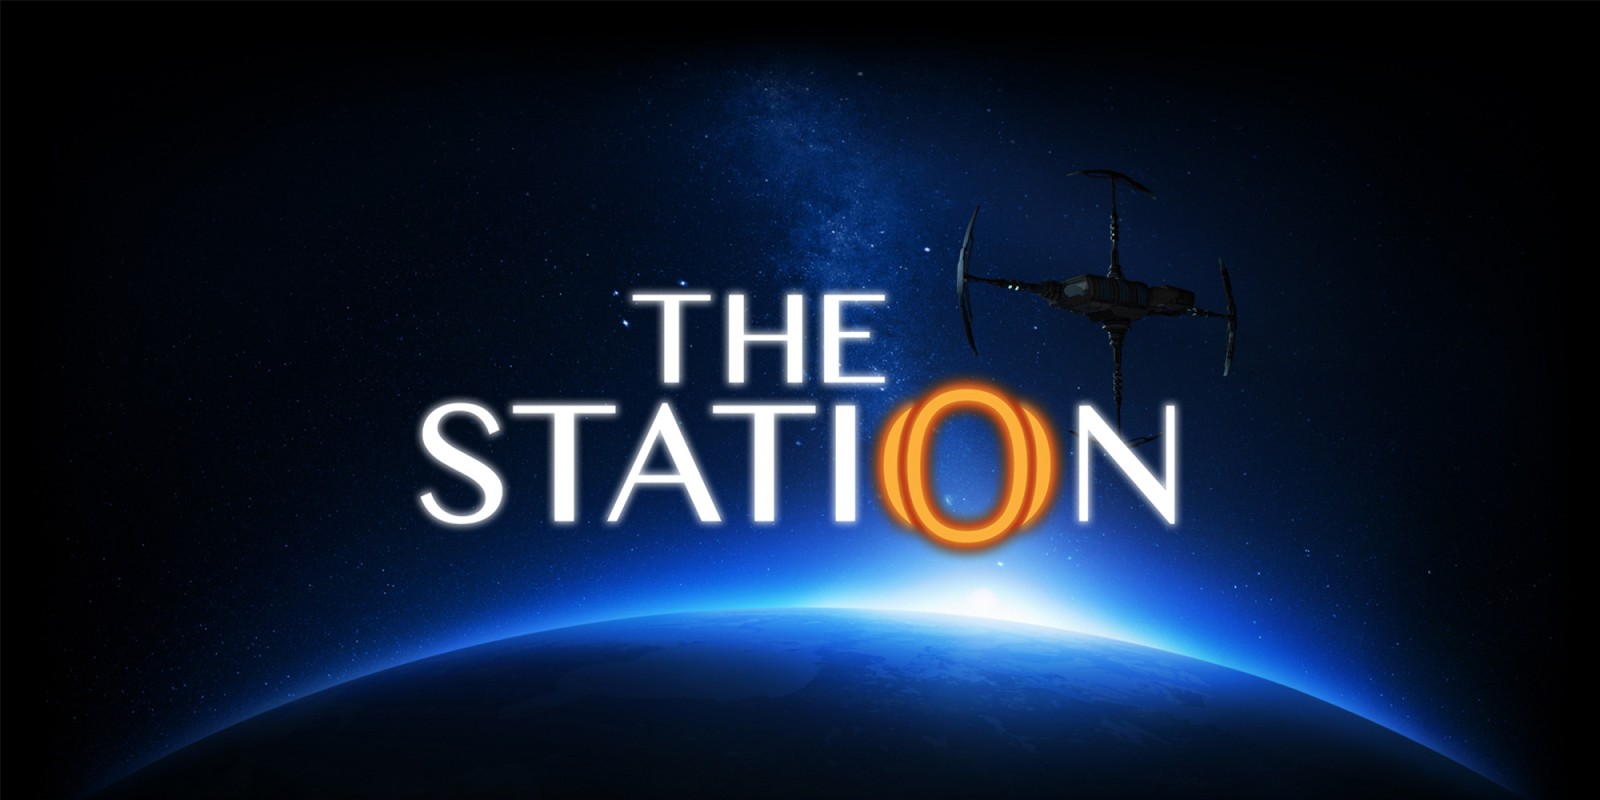 download the final station switch for free